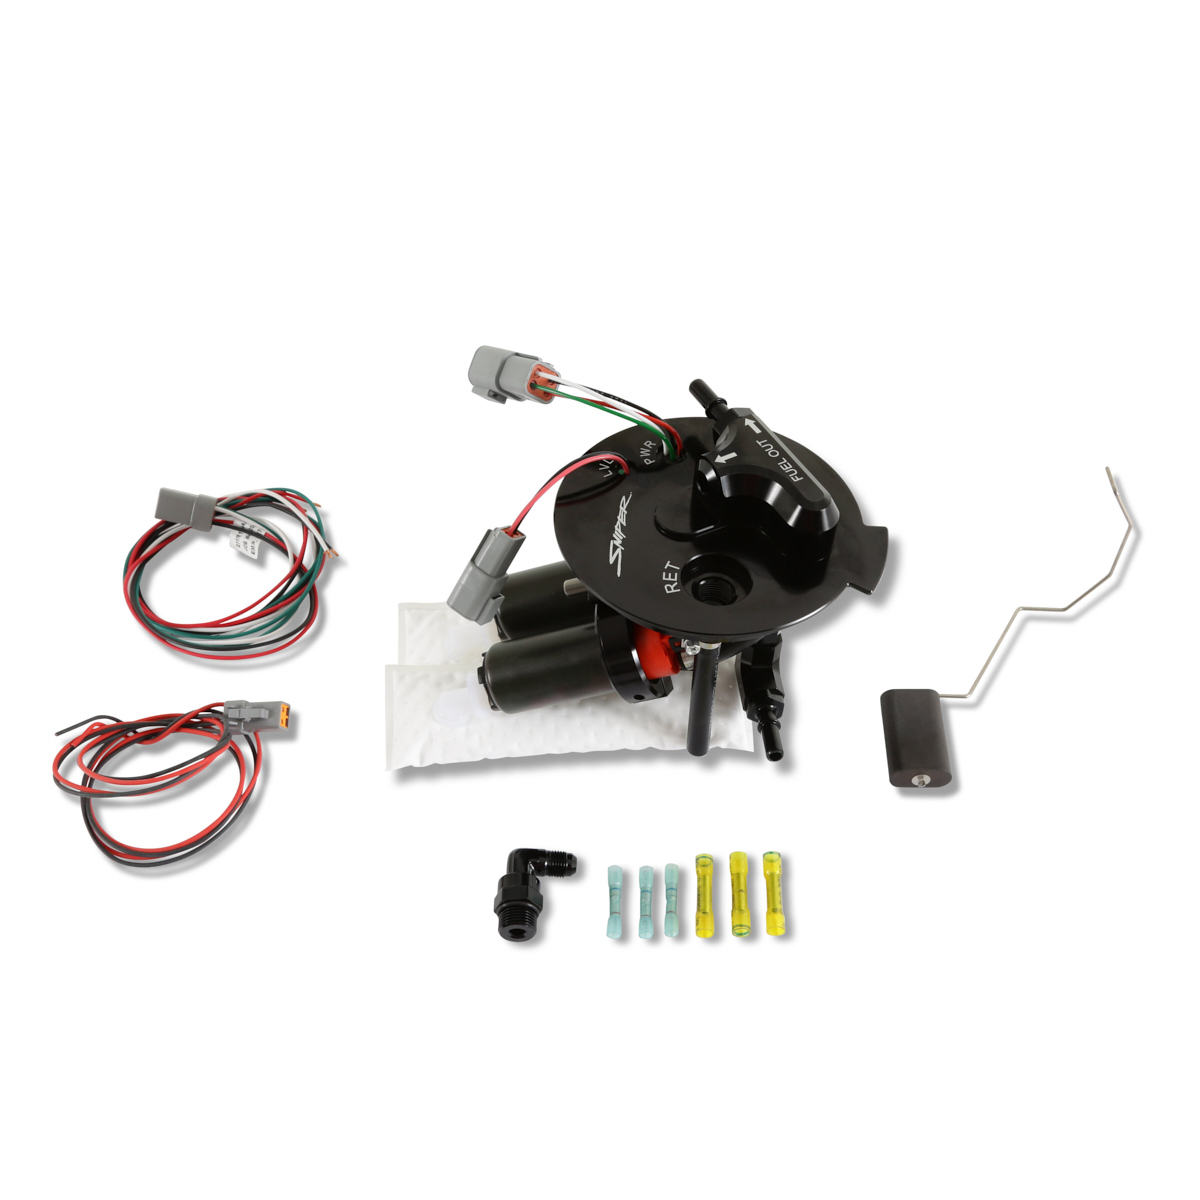 Holley 12-350 Fuel Pump, Electric, Dual 340 lph Pumps, Install Kit, Chevy Camaro 2010-15, Kit